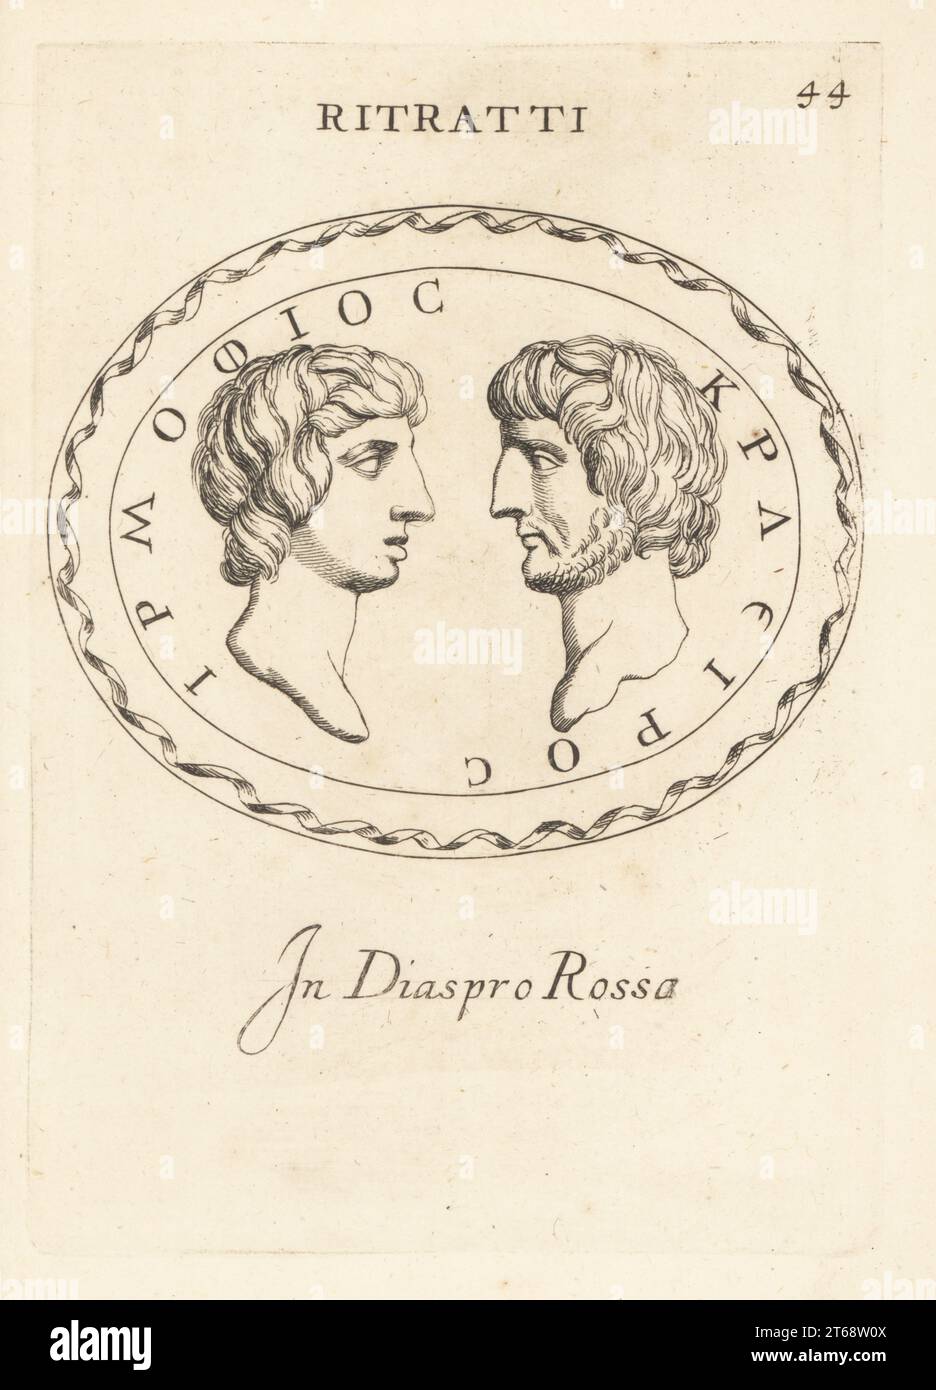 Dual portrait in bust profile facing each other in red jasper. Portrait of two young men, one bearded, possibly friends or relatives, with Greek single names Ermosio and Crairo. Ritratti in diaspro rossa. Copperplate engraving by Giovanni Battista Galestruzzi after Leonardo Agostini from Gemmae et Sculpturae Antiquae Depicti ab Leonardo Augustino Senesi, Abraham Blooteling, Amsterdam, 1685. Stock Photo